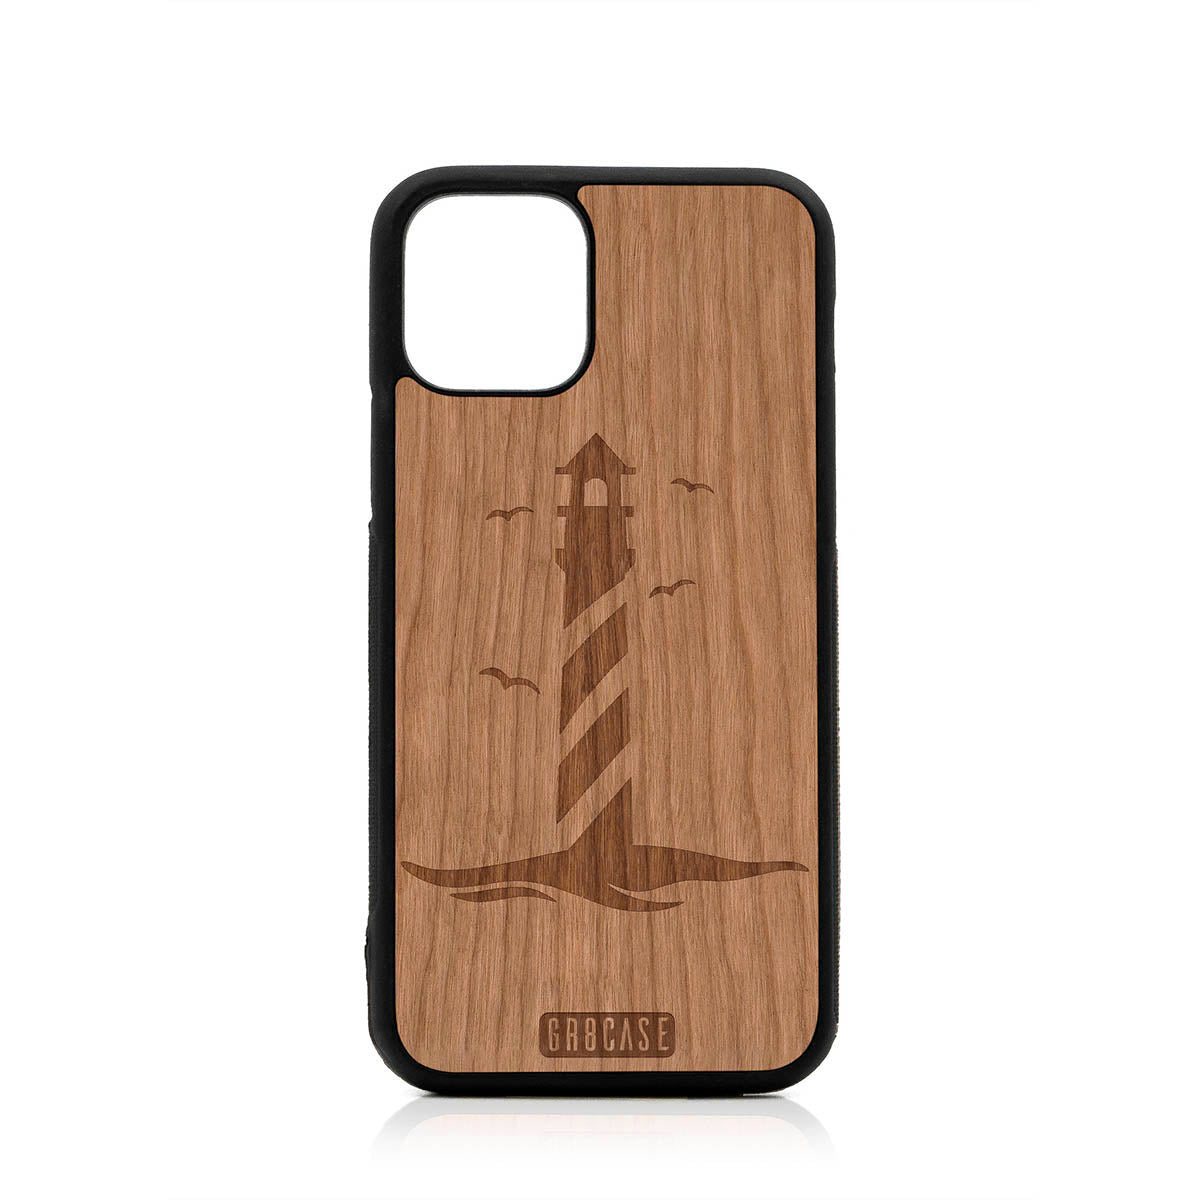 Lighthouse Design Wood Case For iPhone 11 Pro